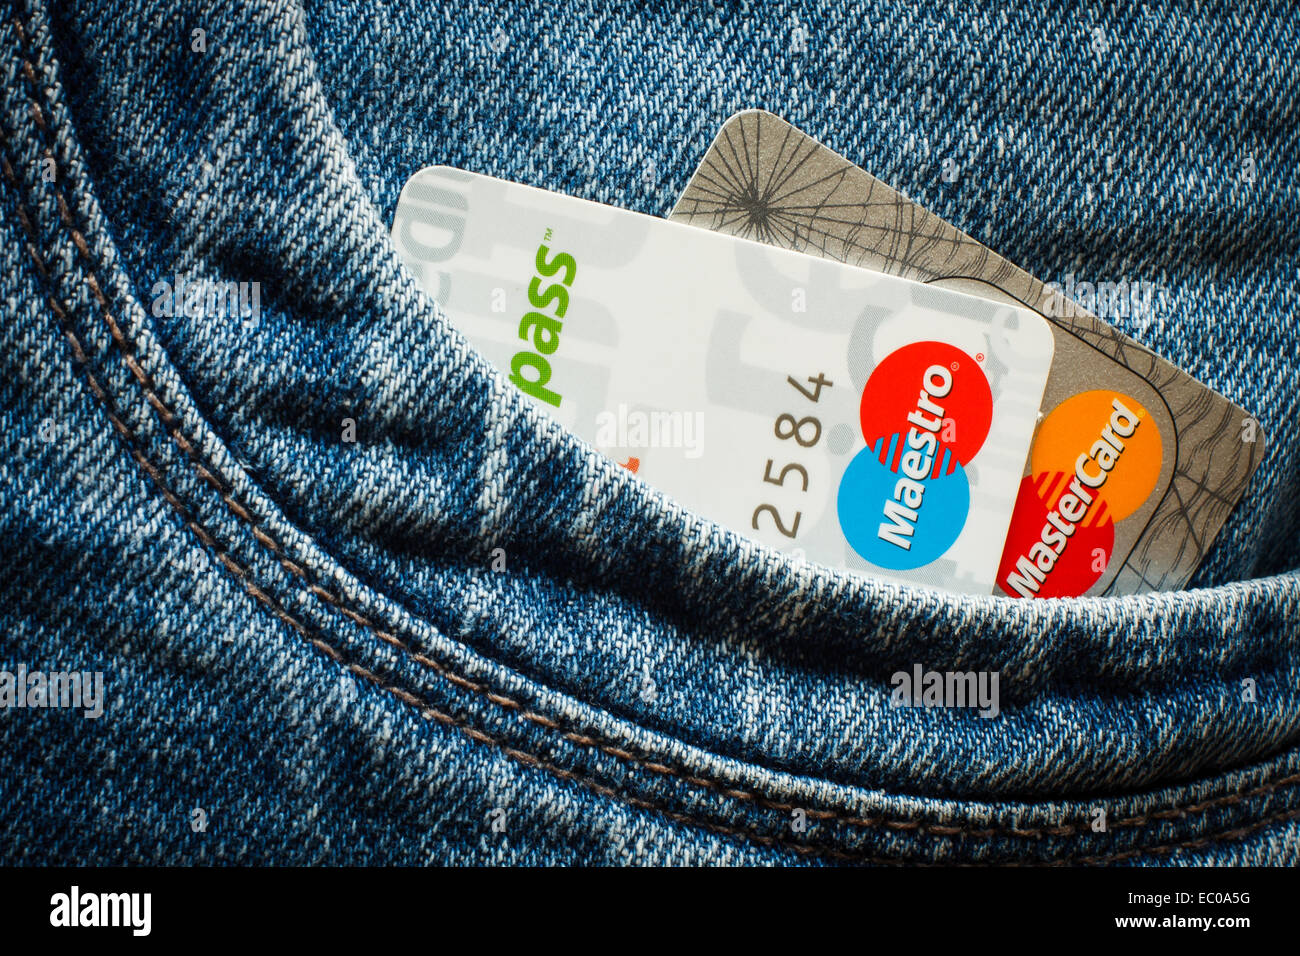 GDANSK, POLAND - 16 APRIL 2014. Credit cards with paypass technology. Editorial use only Stock Photo